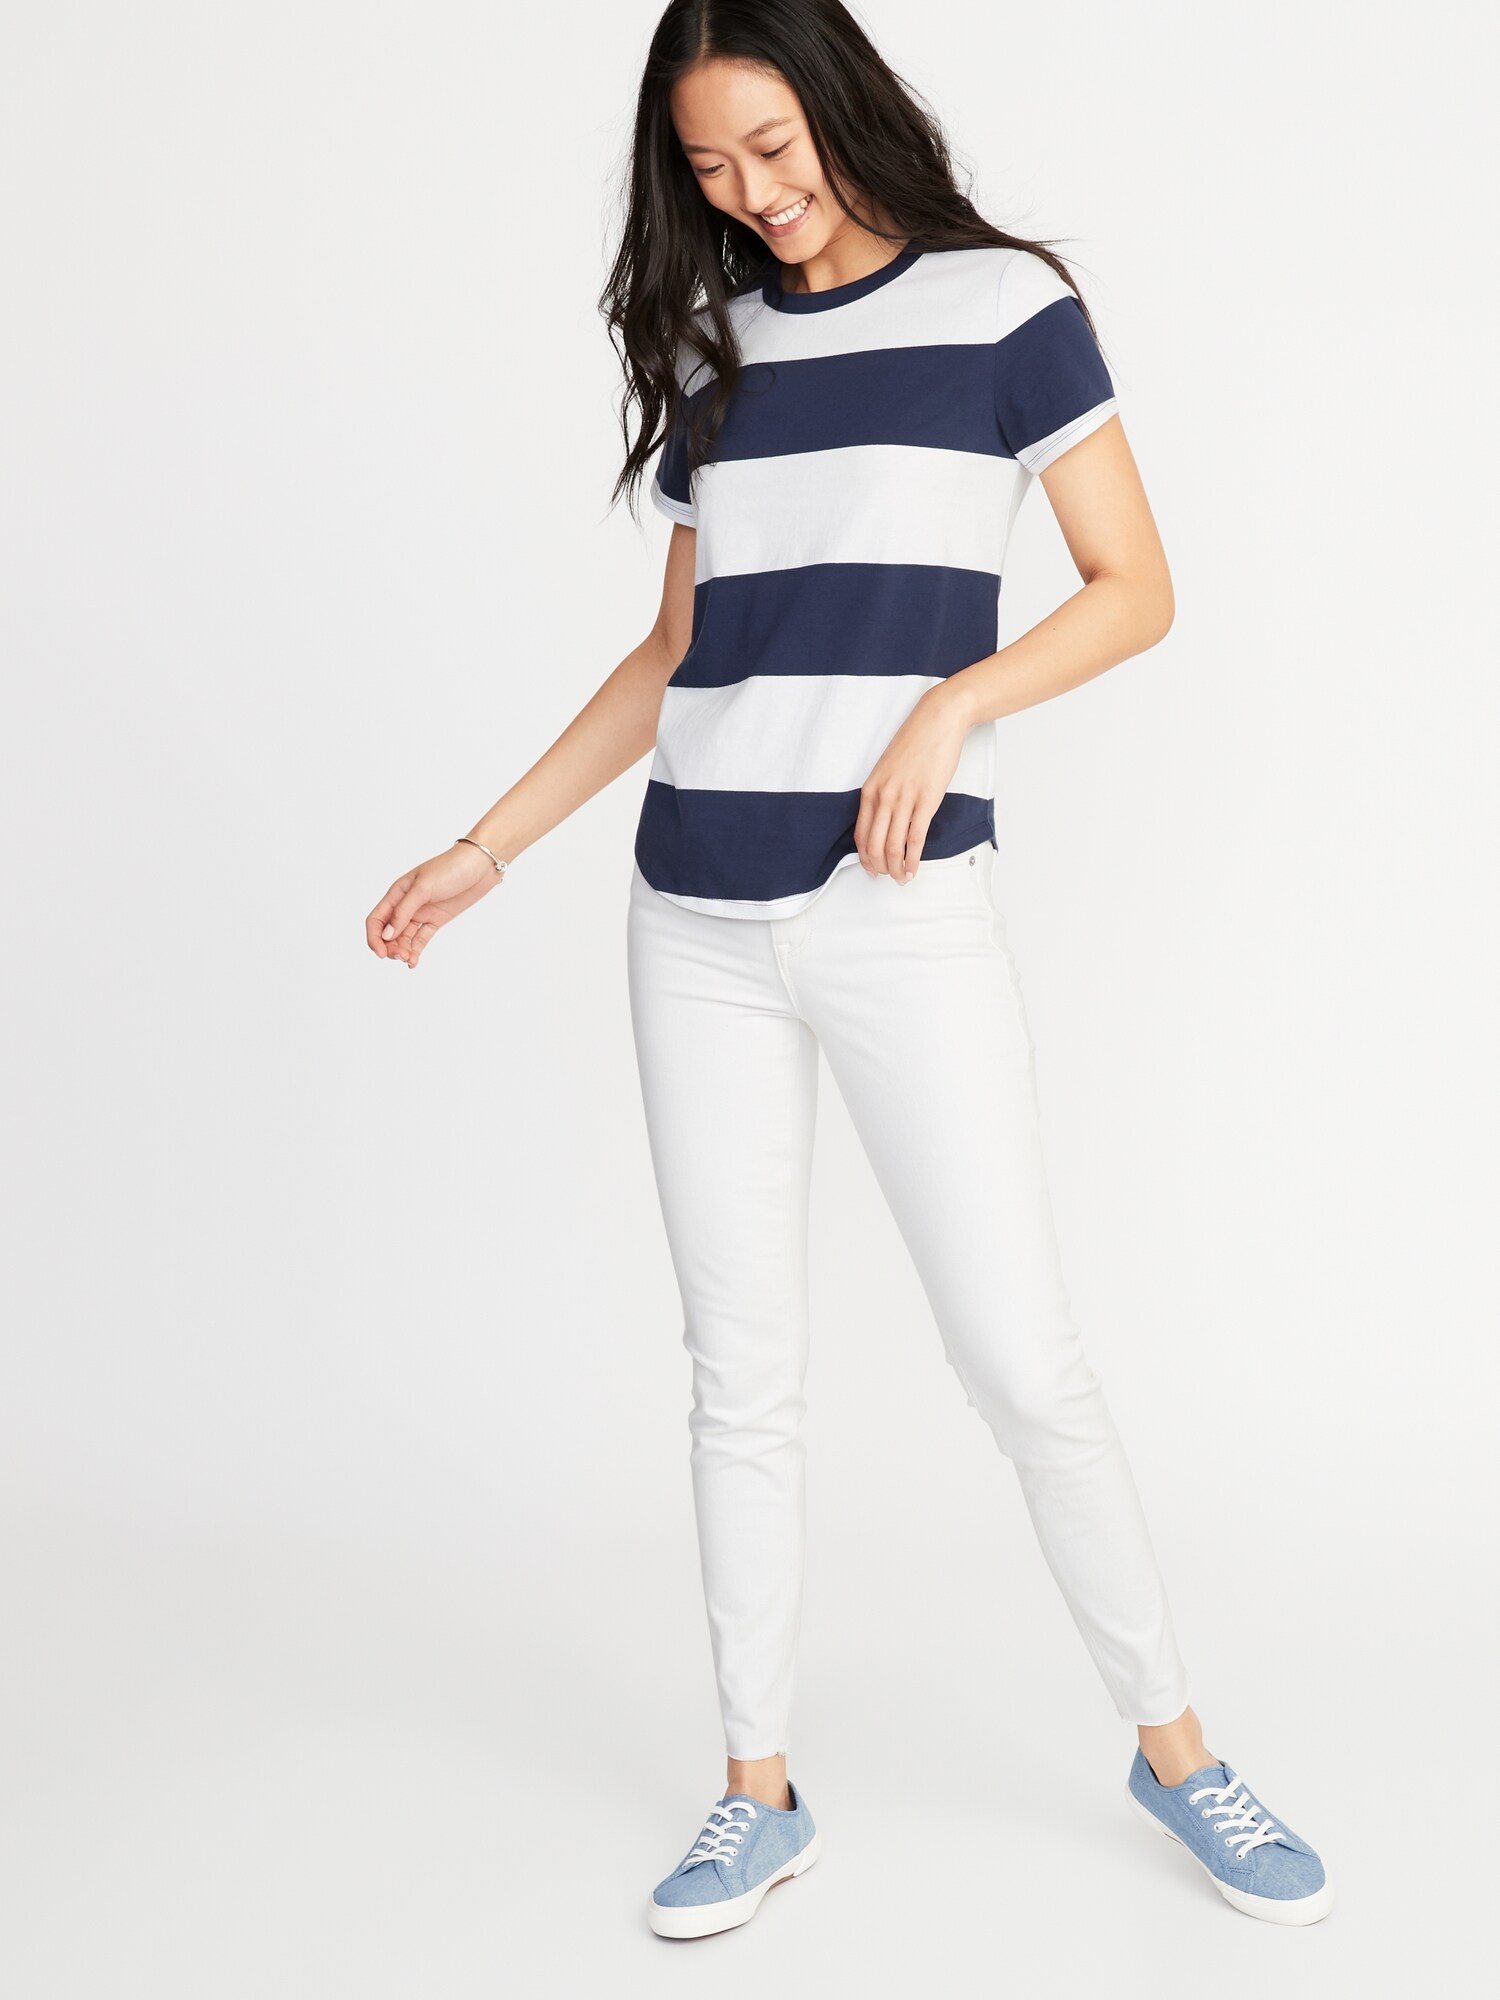 EveryWear Rugby-Striped Tee for Women | Old Navy